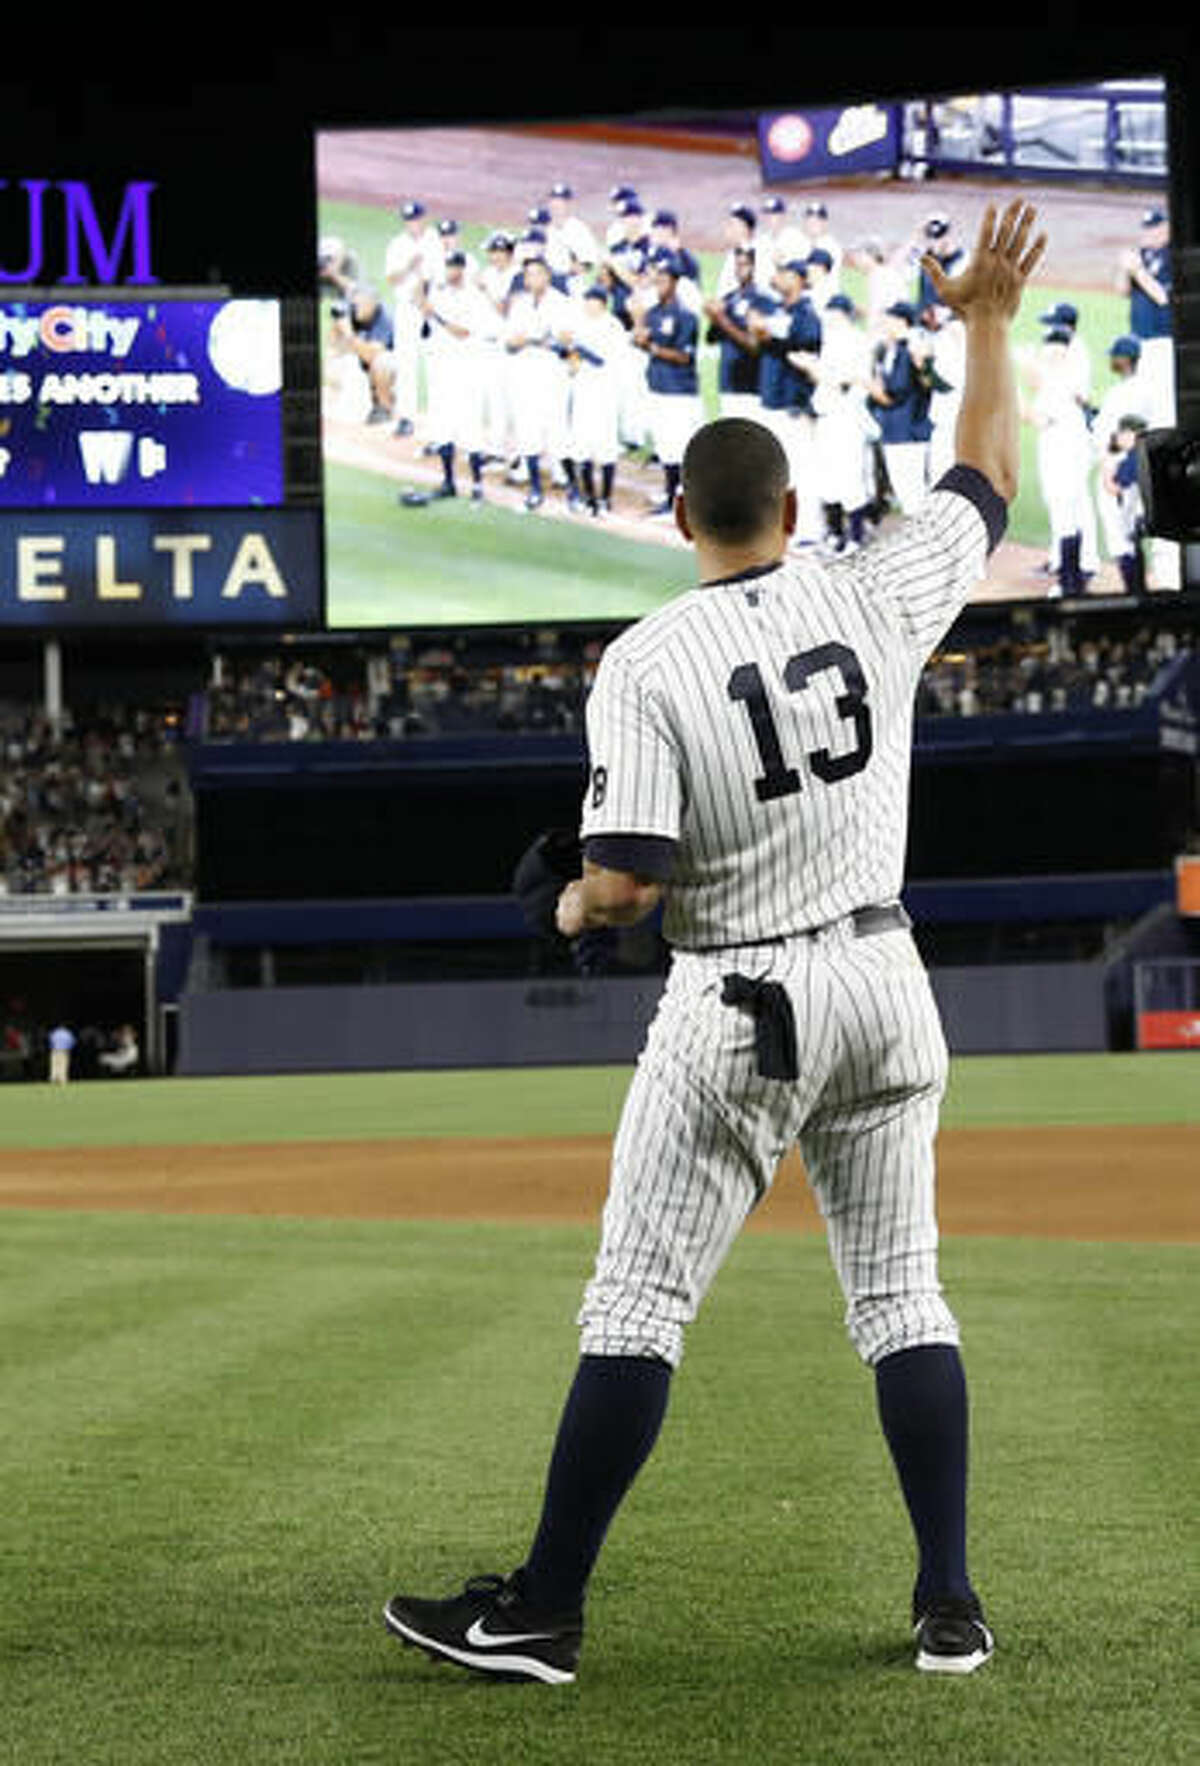 New York Yankees' Alex Rodriguez (13) waves goodbye to fans after playing in his final baseball game as a Yankee against the Tampa Bay Rays at Yankee Stadium in New York, Friday, Aug. 12, 2016. The Yankees won 6-3. (AP Photo/Kathy Willens)